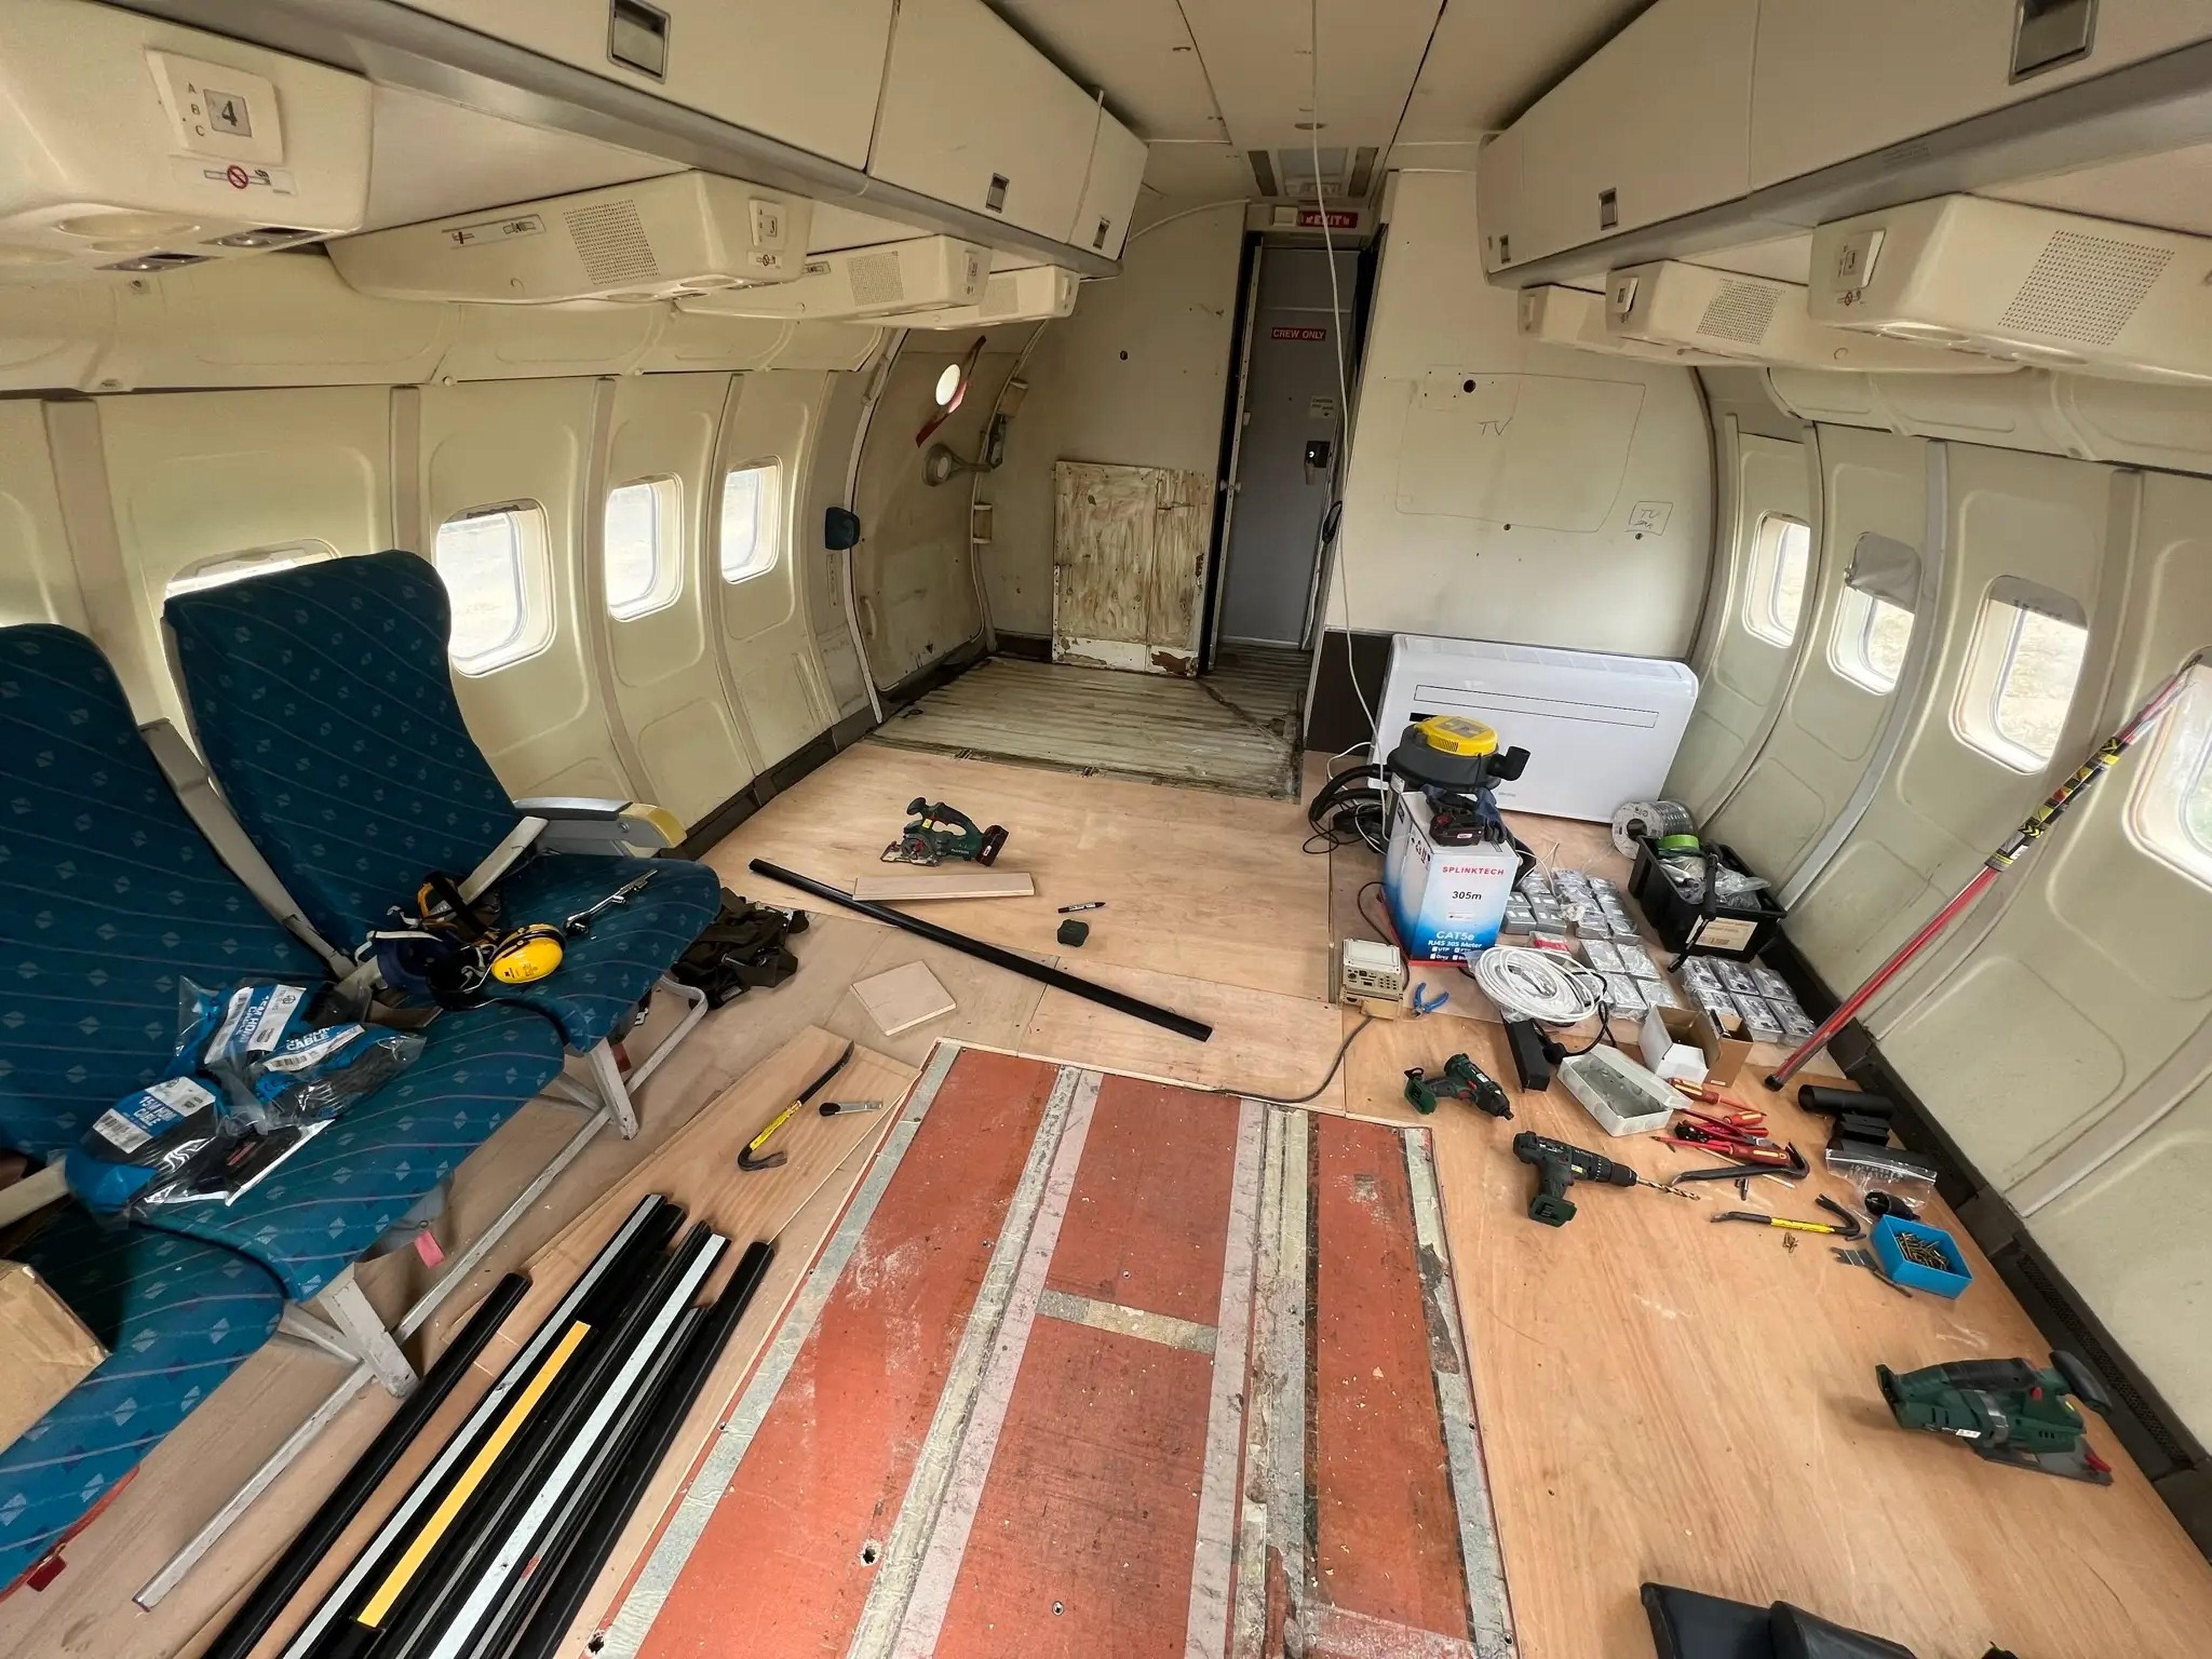 Inside of plane mid-construction